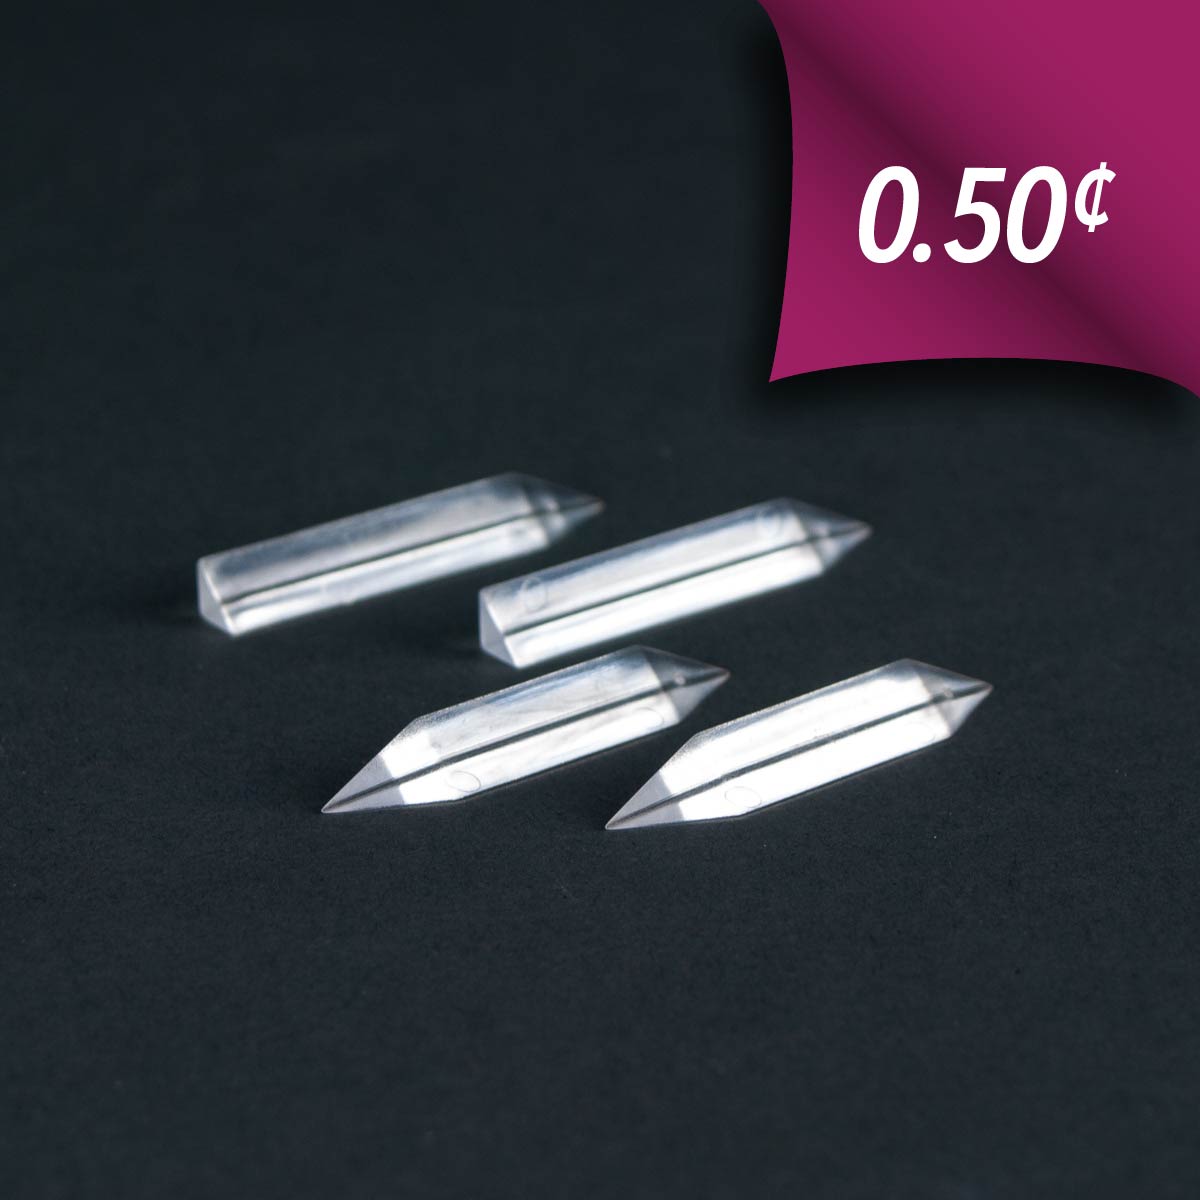 Craftics clear acrylic sonnex tapered end blocks